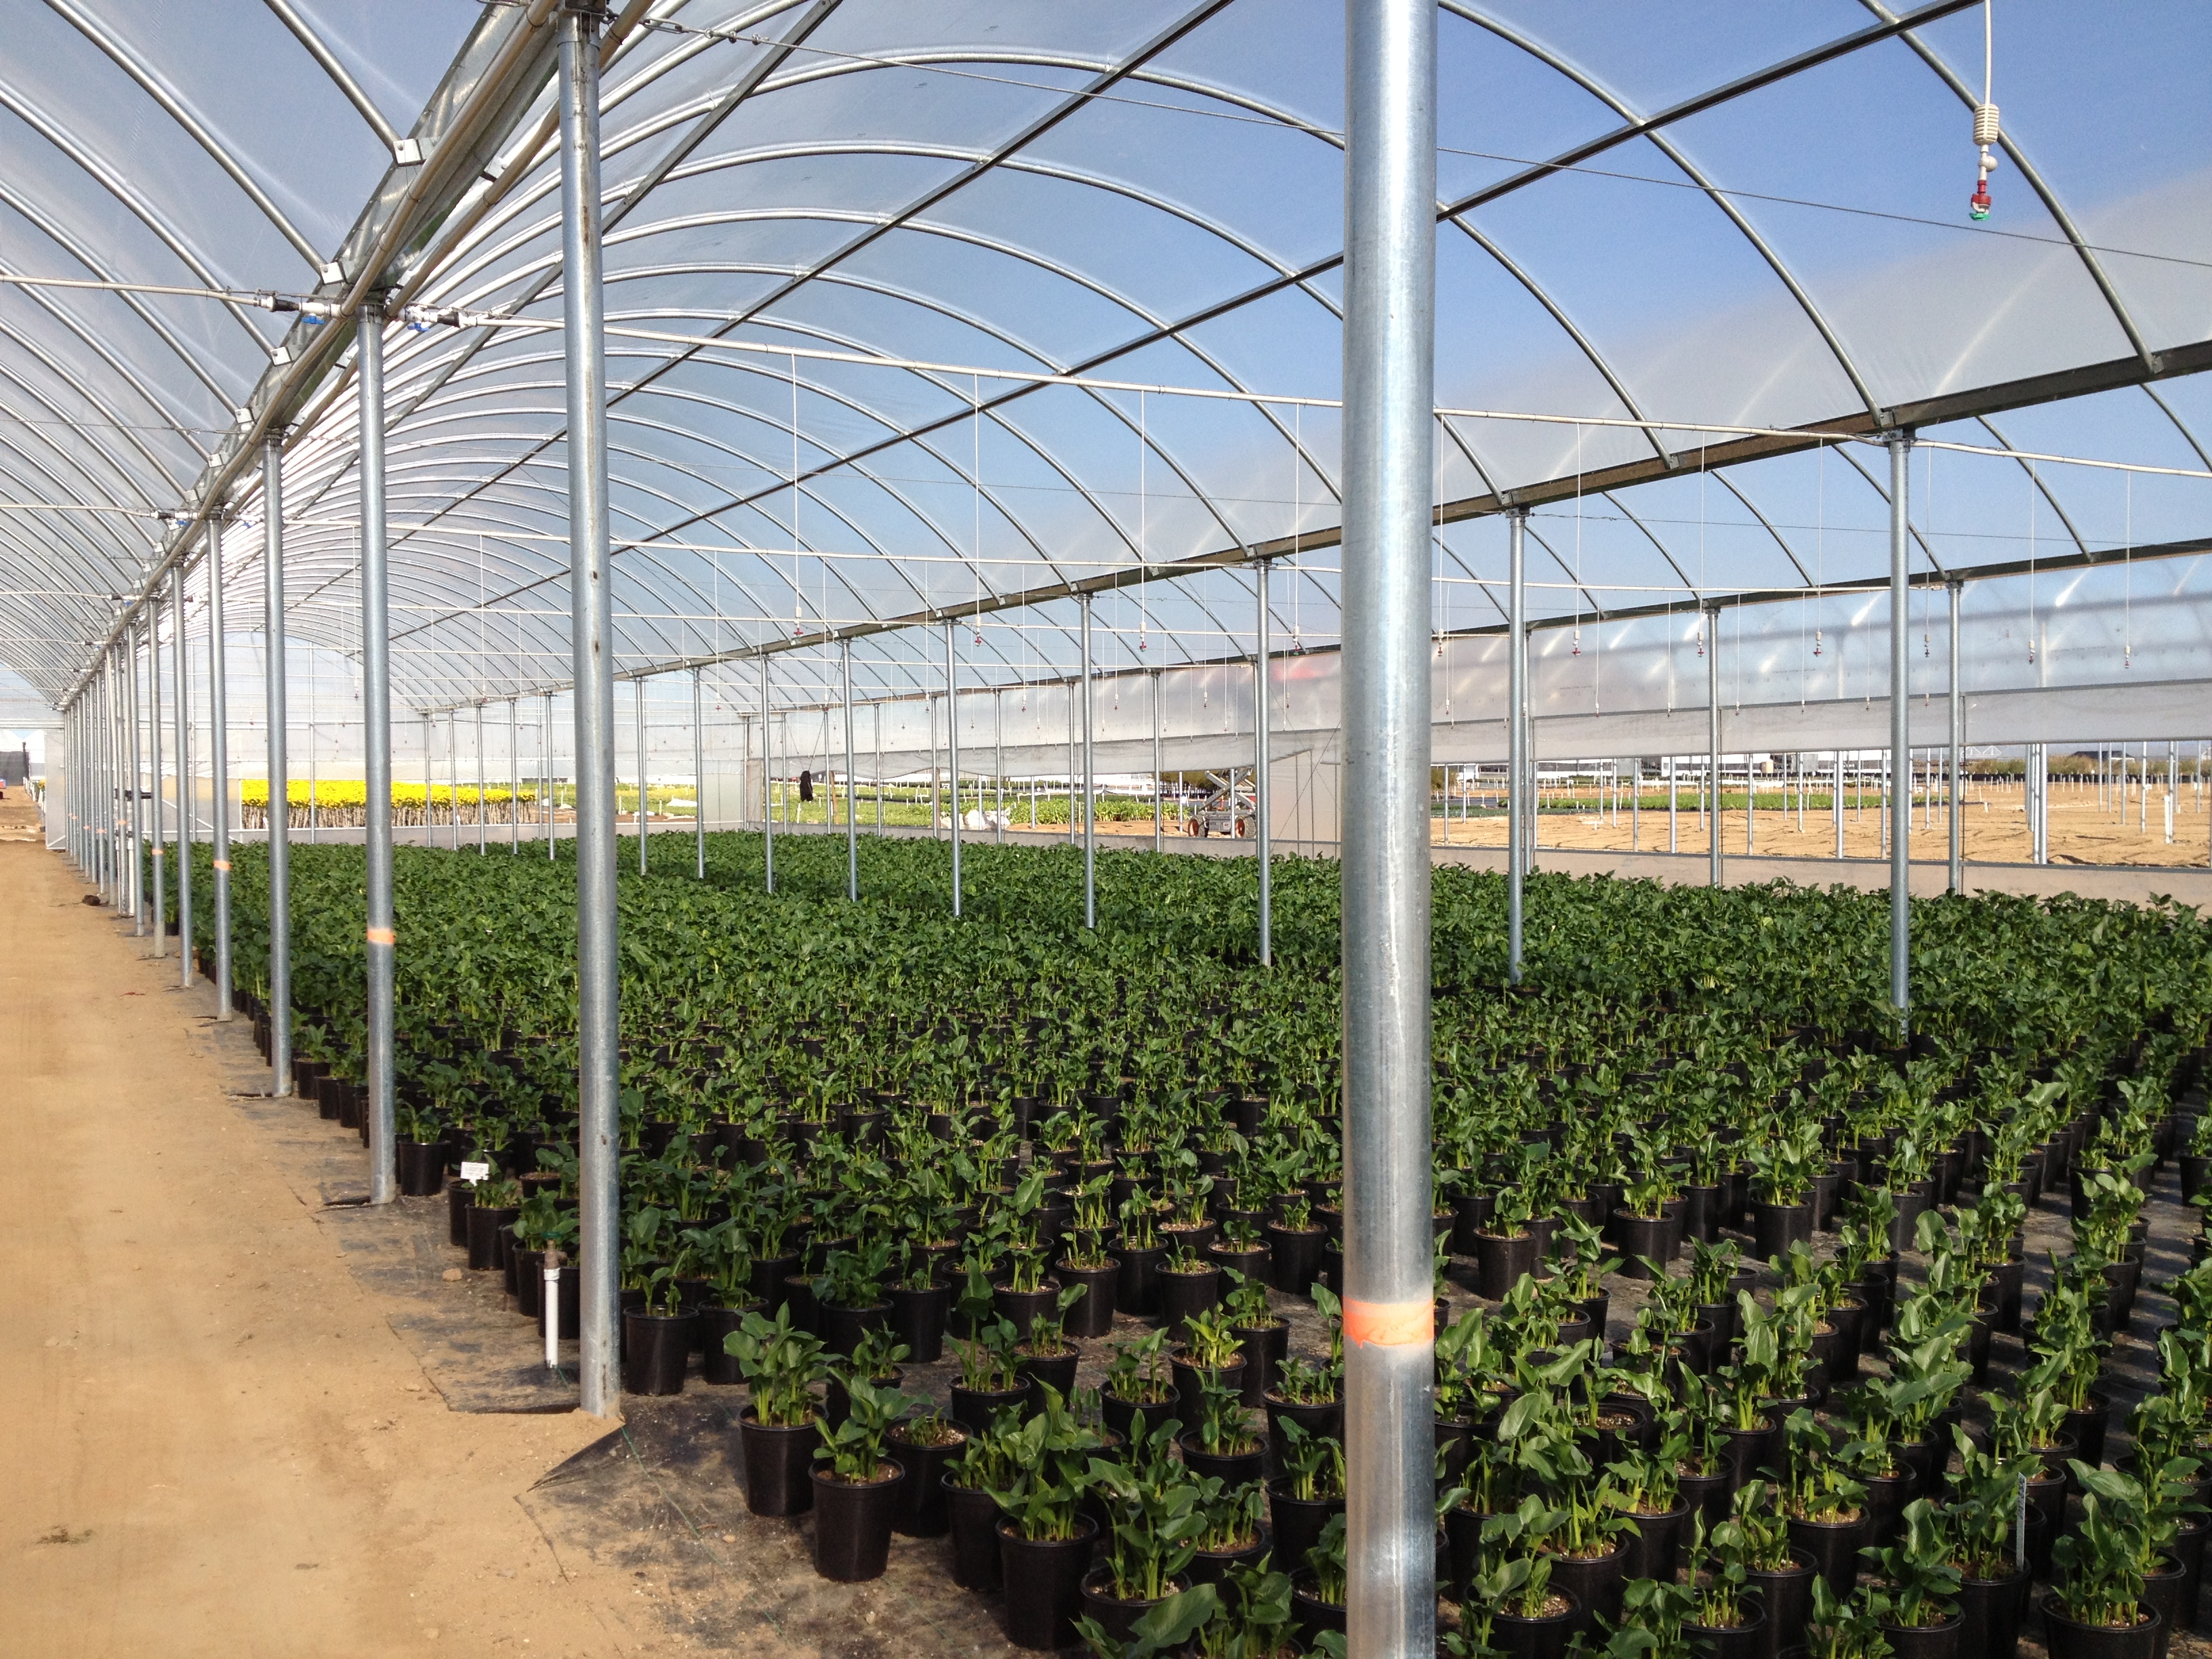 Commercial Greenhouse Manufacturer - Rough Brothers Inc